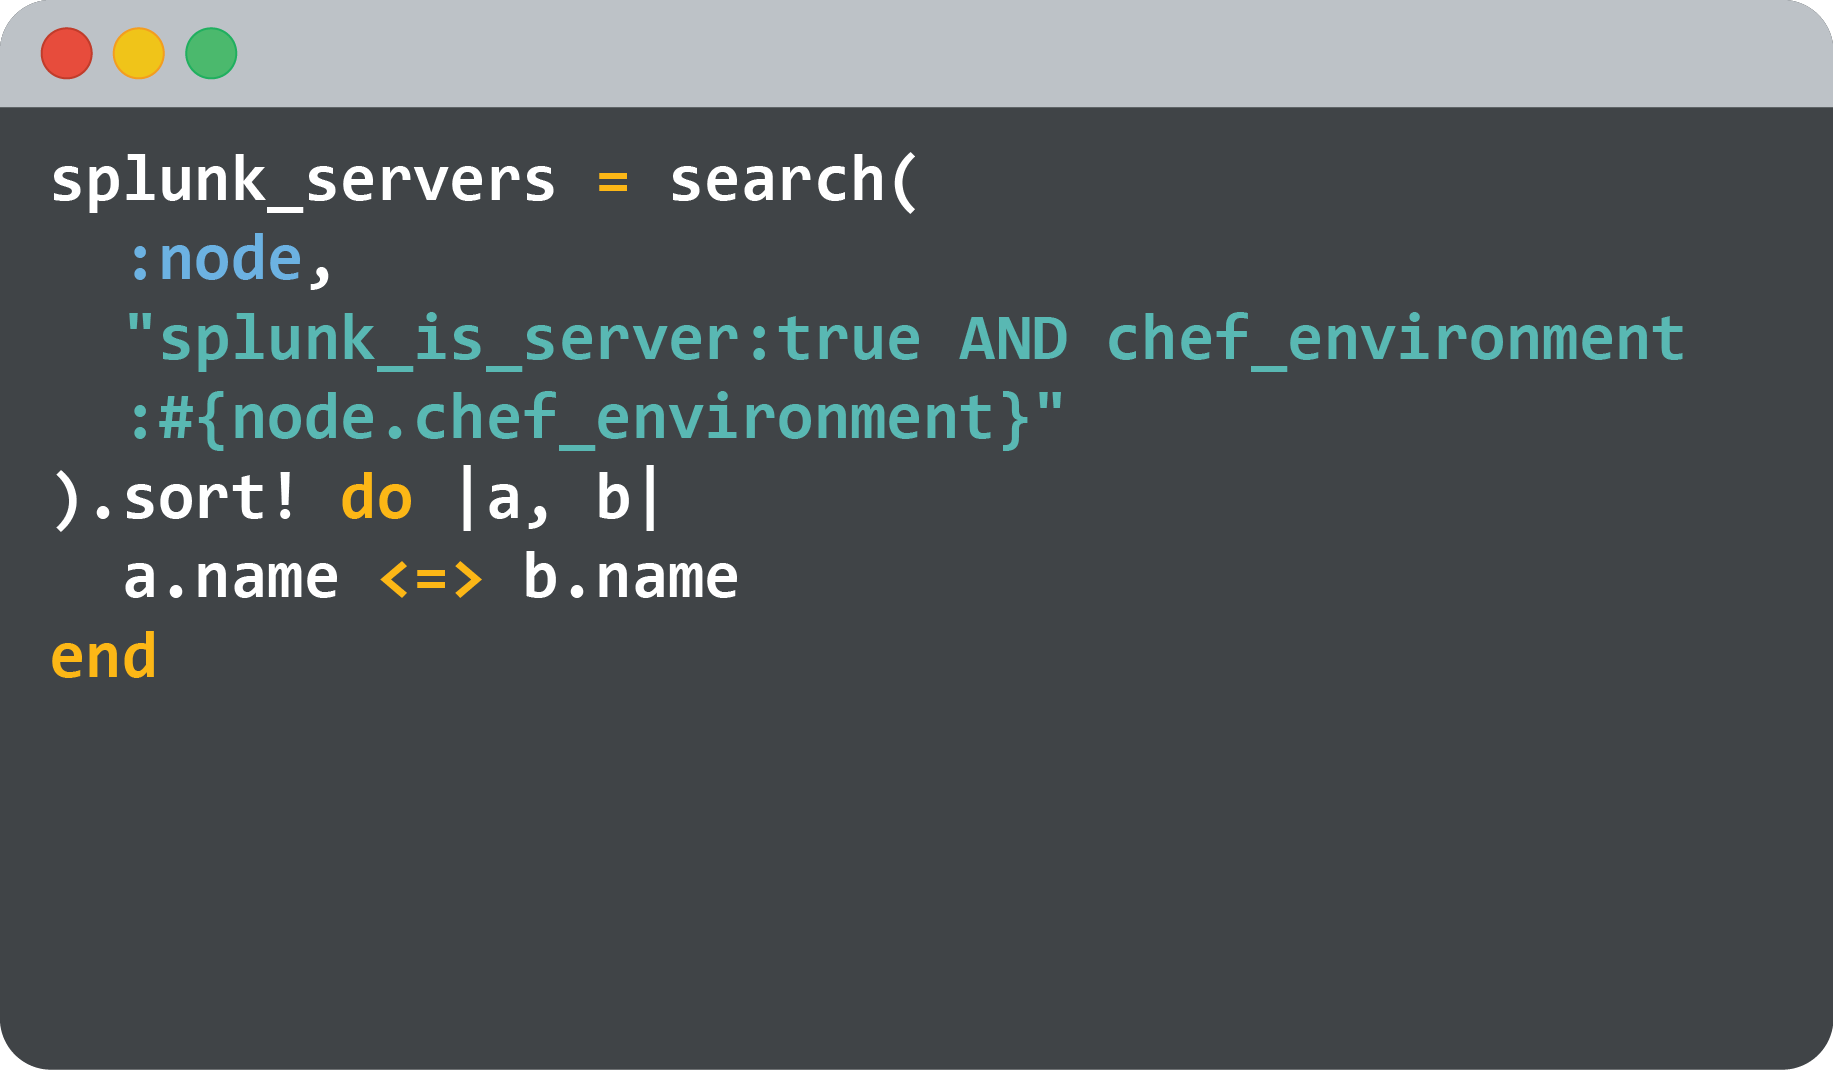 Chef lets you Use search-based policy to dynamically update node configuration based on data from other nodes.